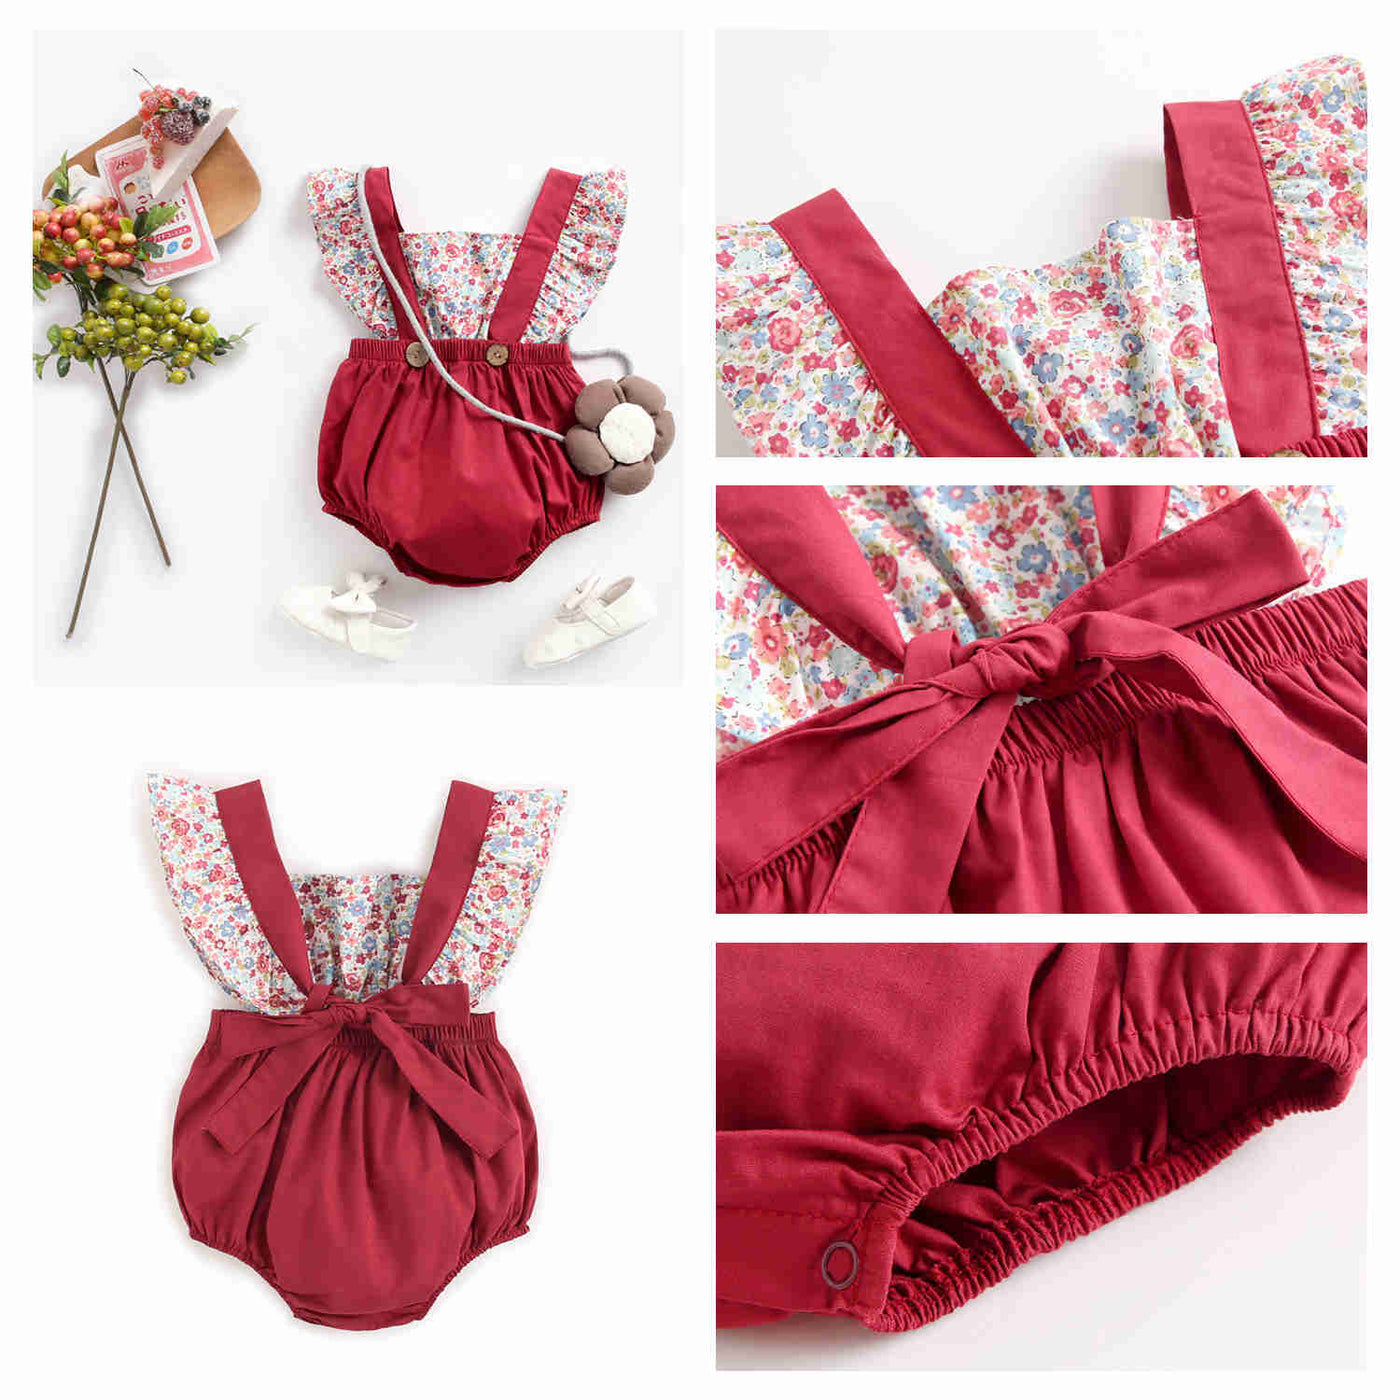 Cute Flower Romper 0-3yrs Jumpsuit - Coco Potato - dresses and partywear for little girls